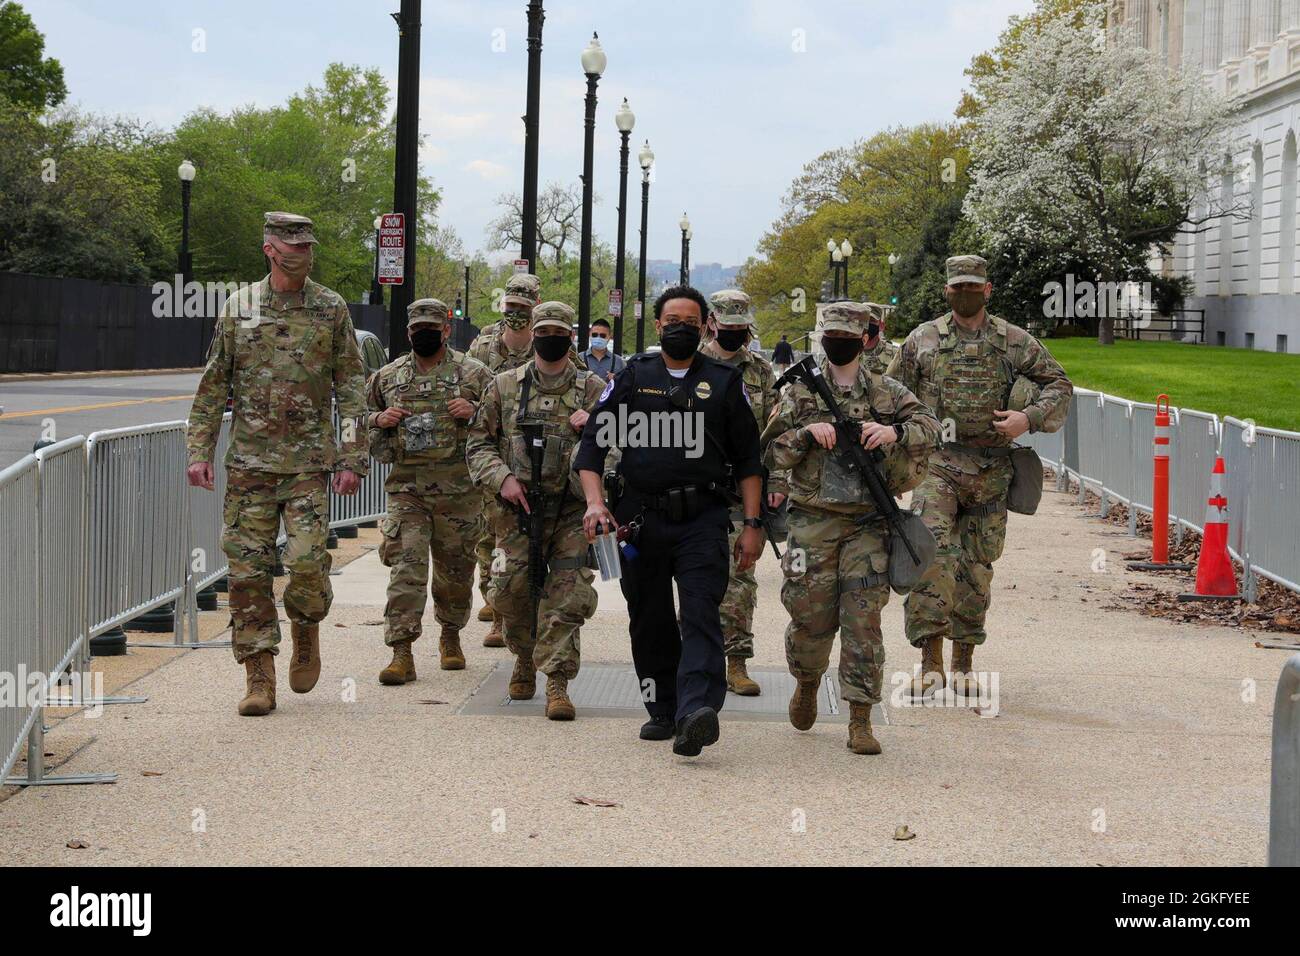 U.S. Capitol Police Officer Andre Womack II, center, patrols his area with his detail of Kentucky National Guard soldiers near the U.S. Capitol in Washington, D.C., April 12, 2021. The National Guard has been requested to continue supporting federal law enforcement agencies with security, communications, medical evacuation, logistics, and safety support to state, district and federal agencies through mid-May. Stock Photo